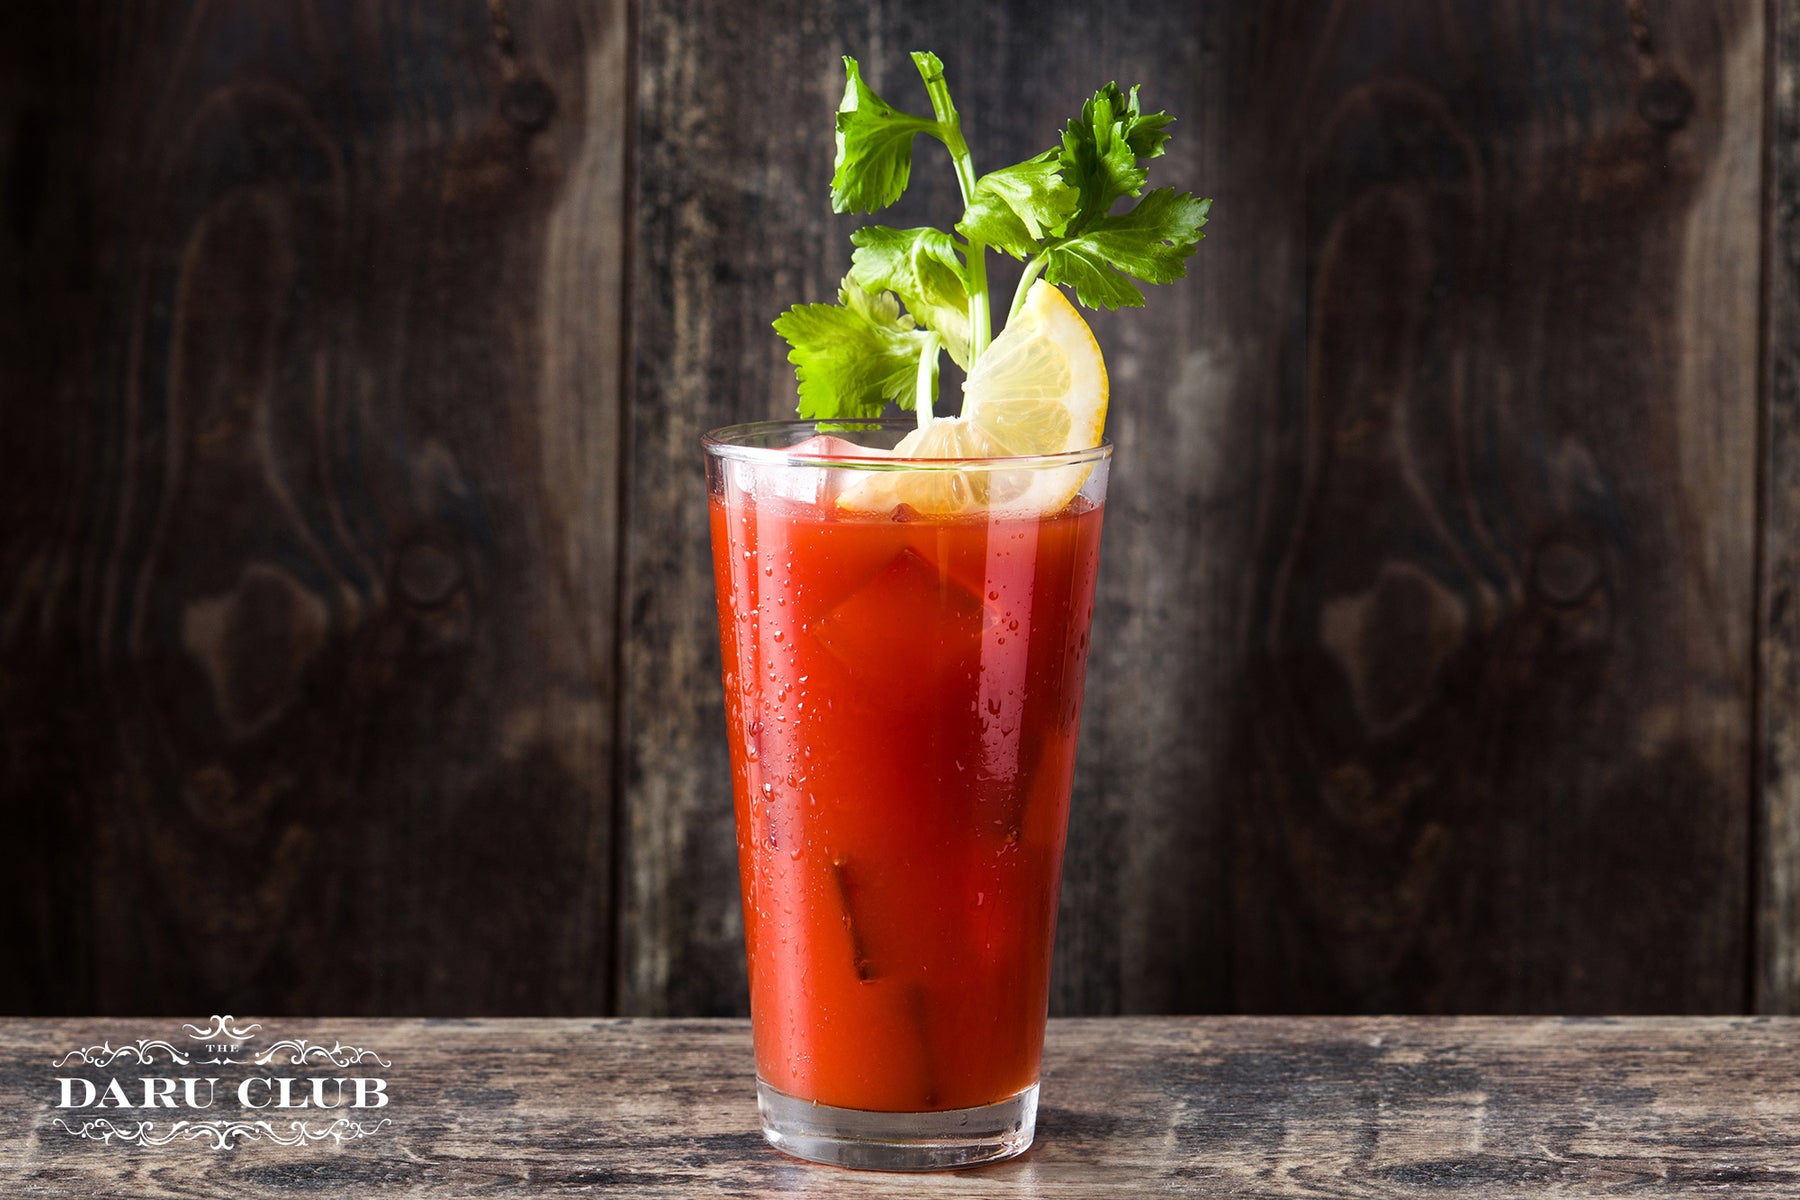 Get set for a boozy brunch - The Bloody Mary Cocktail